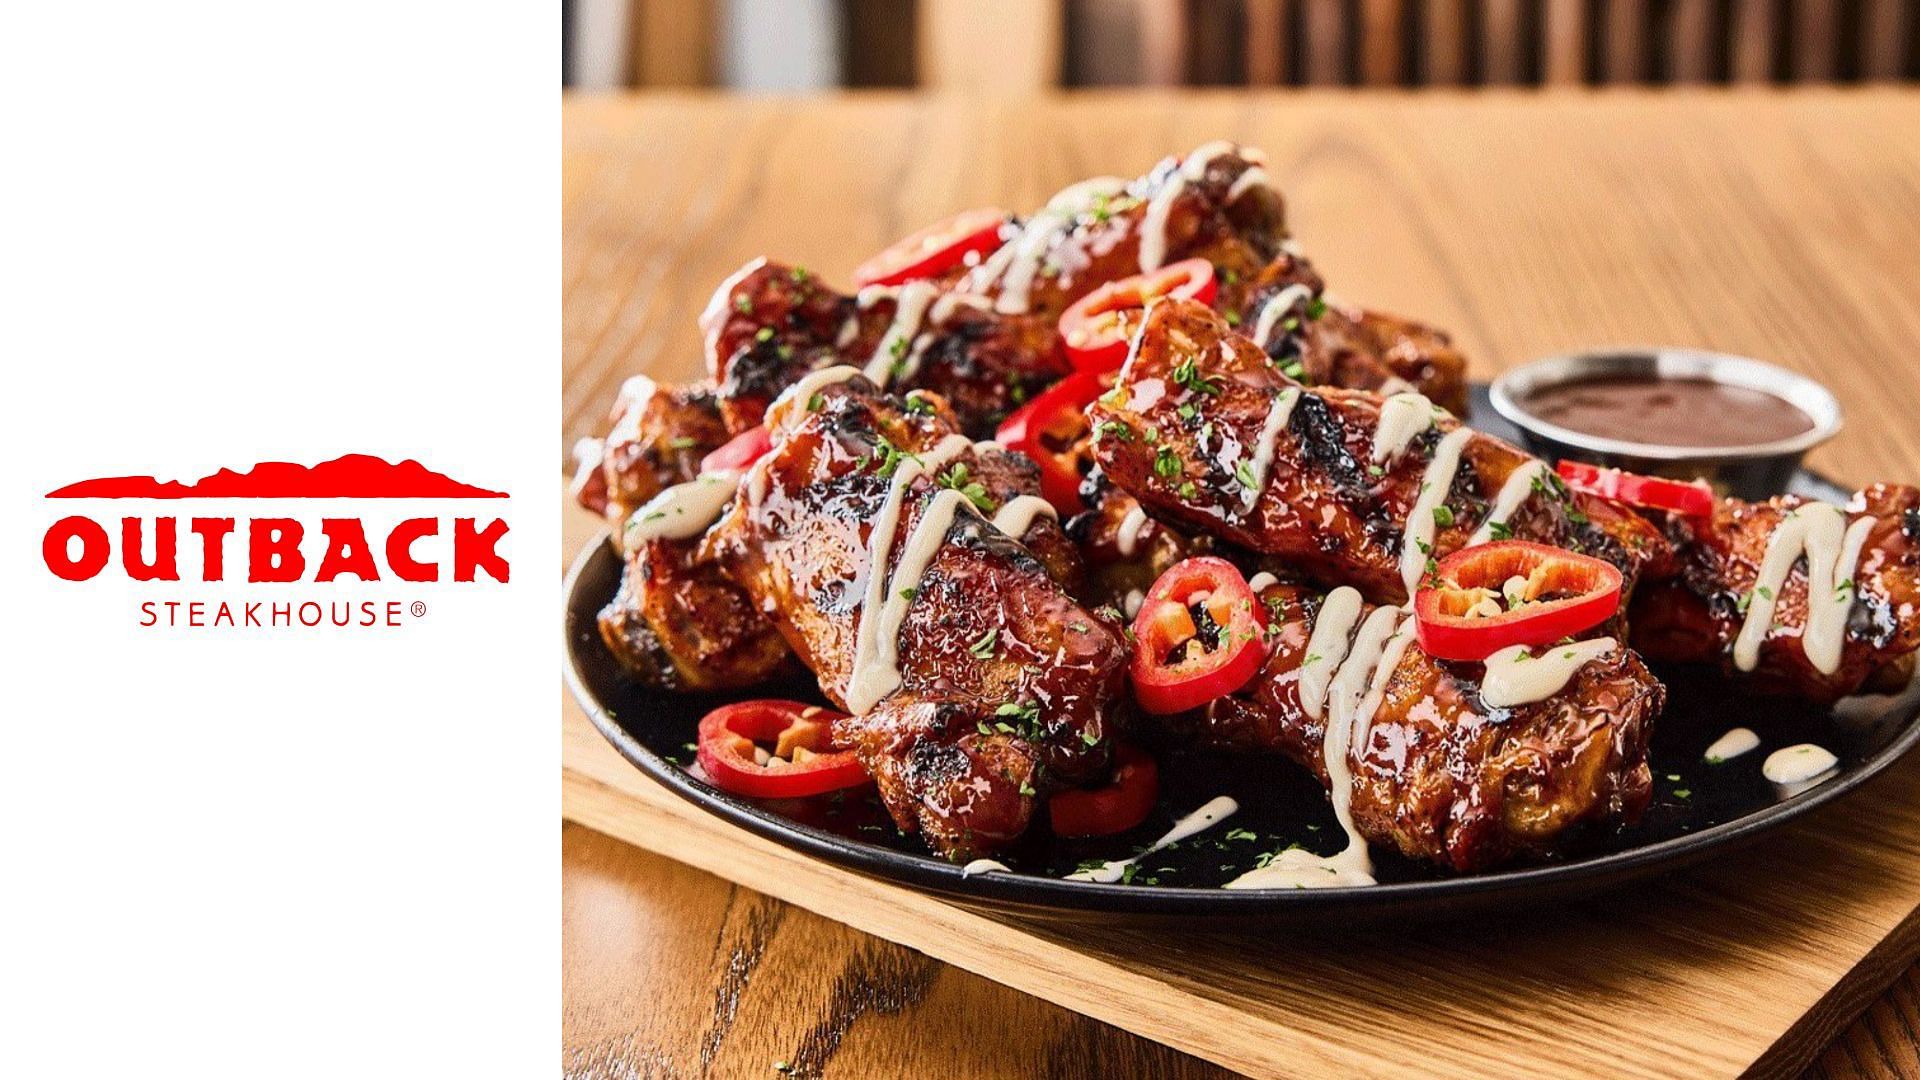 Outback Steakhouse introduces a limited-time Aussie-style menu (Image via Outback Steakhouse)